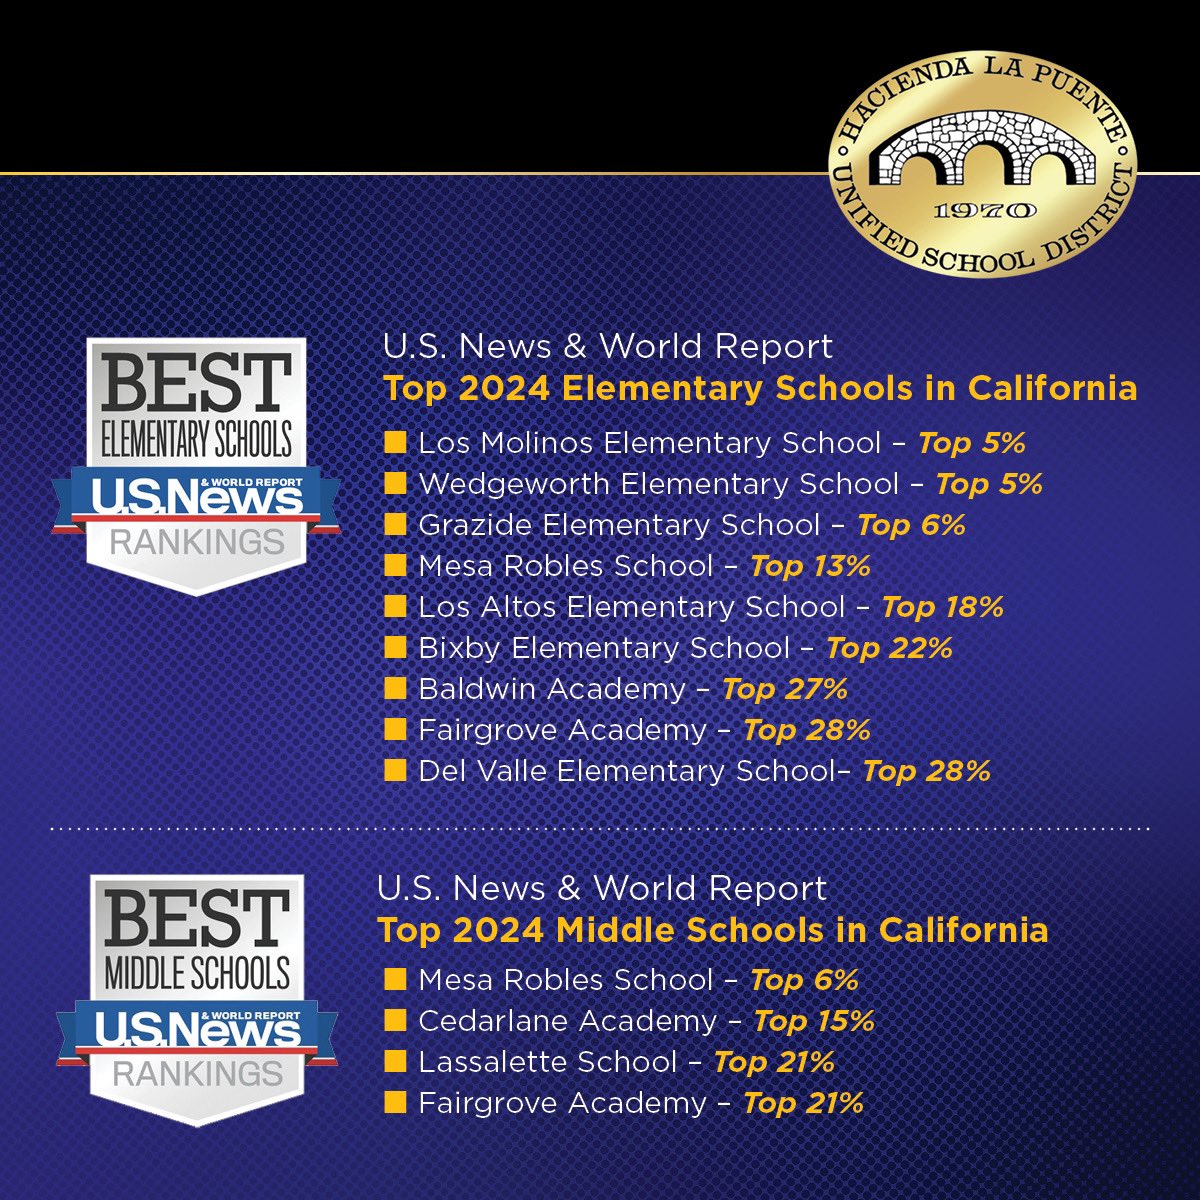 In addition to our outstanding high school recognitions, nine elementary and four middle schools have scored in the top 28% of schools in the state based on the U.S. News & World Report's best elementary and middle school rankings! Fantastic work, HLPUSD!